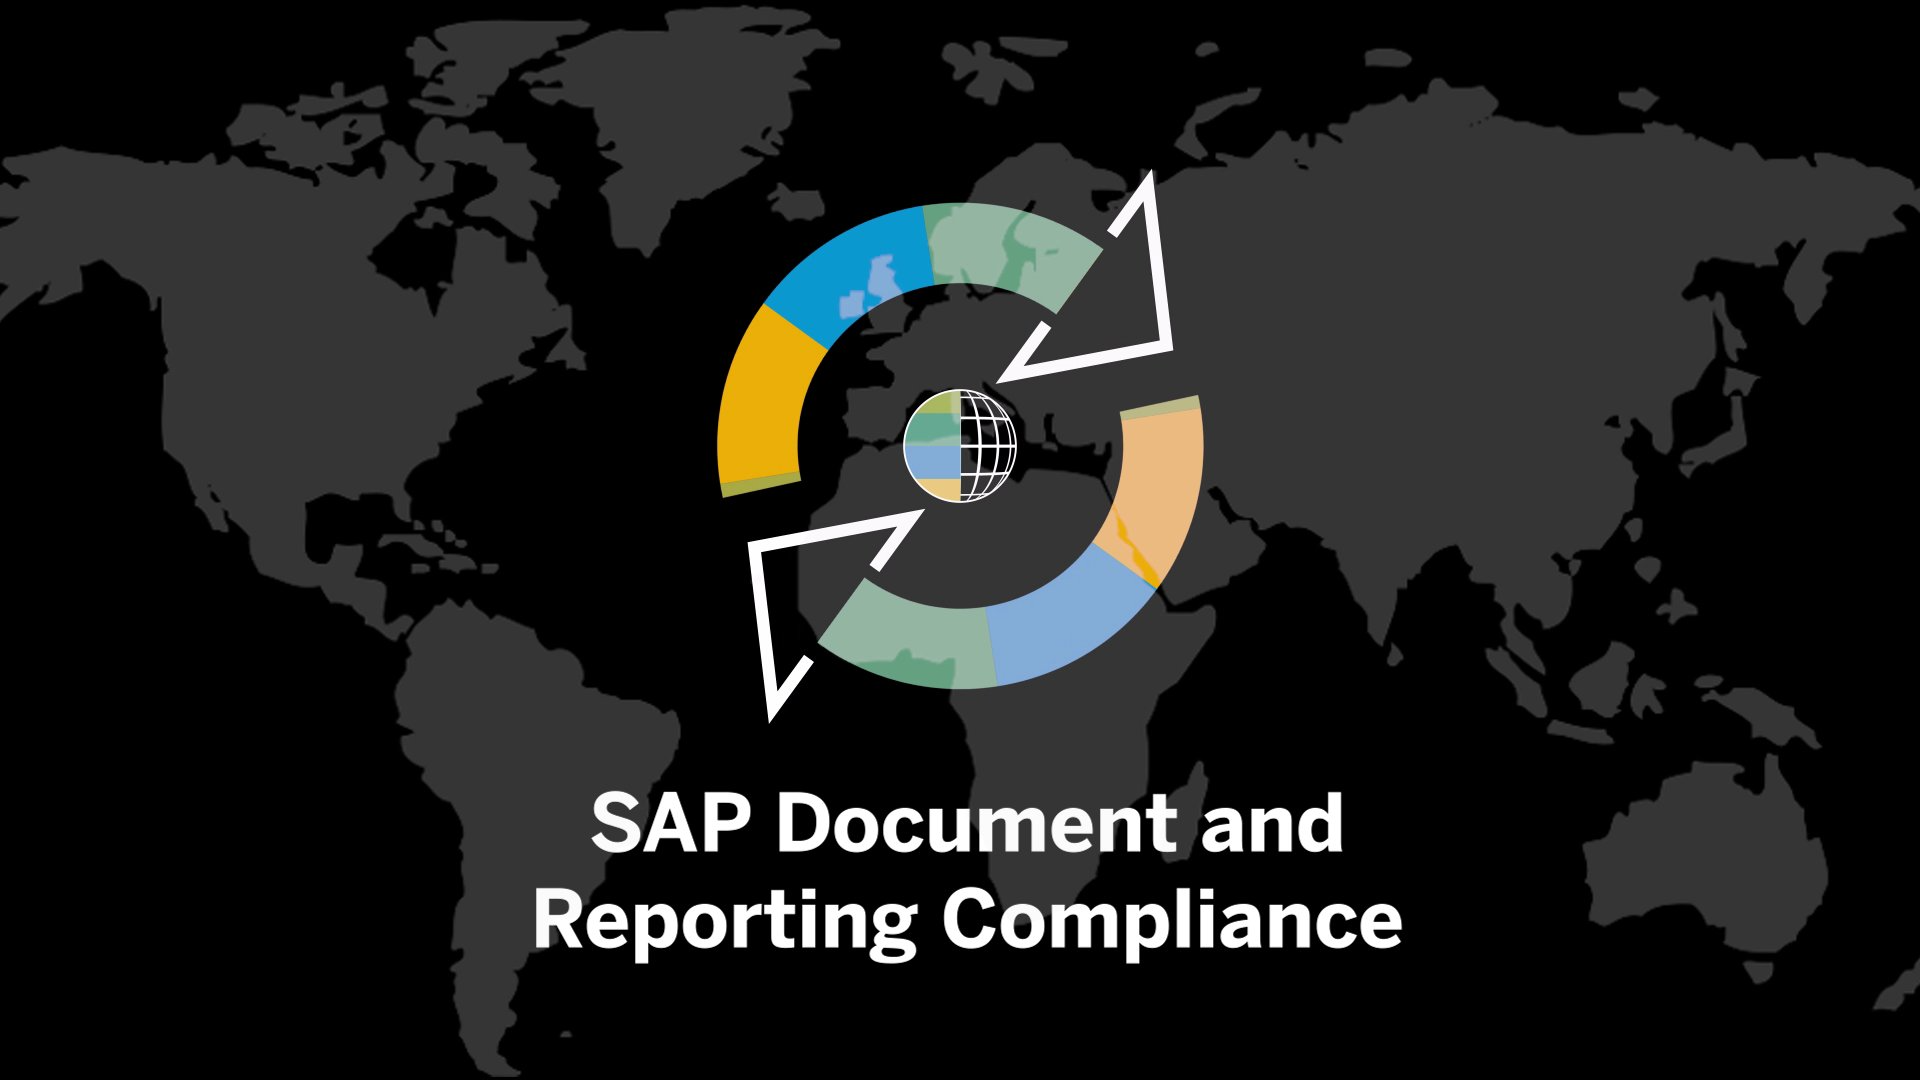 SAP Document Reporting Compliance (DRC)